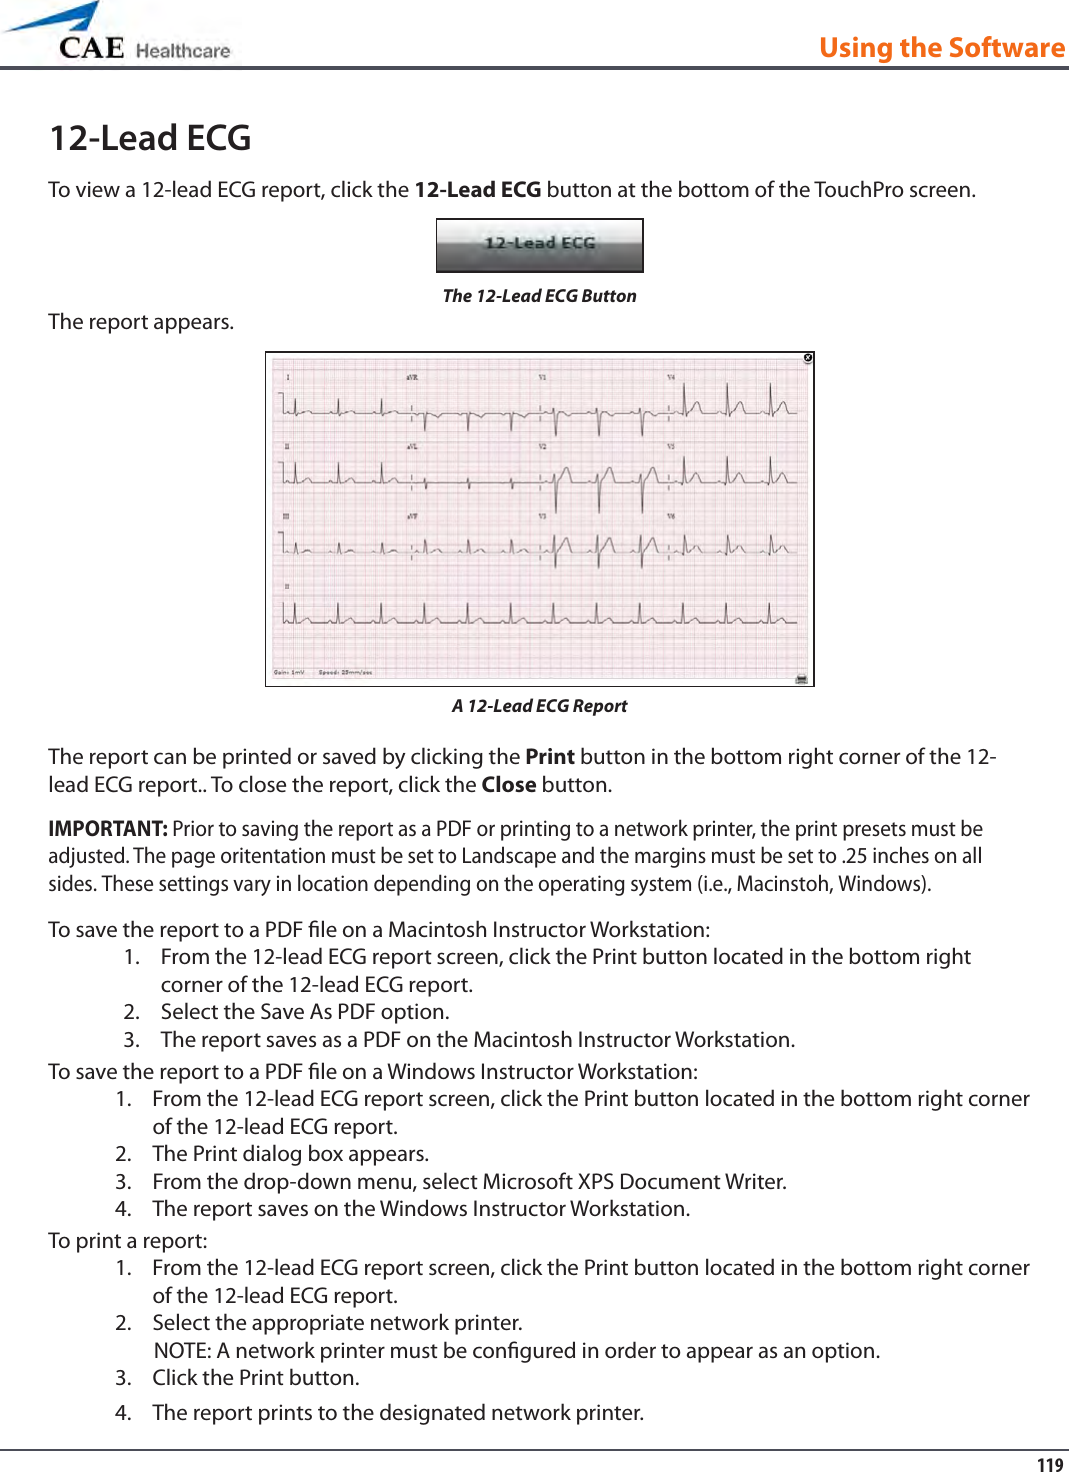 119Using the Software12-Lead ECGTo view a 12-lead ECG report, click the 12-Lead ECG button at the bottom of the TouchPro screen.The 12-Lead ECG ButtonThe report appears.A 12-Lead ECG ReportThe report can be printed or saved by clicking the Print button in the bottom right corner of the 12-lead ECG report.. To close the report, click the Close button.IMPORTANT: Prior to saving the report as a PDF or printing to a network printer, the print presets must be adjusted. The page oritentation must be set to Landscape and the margins must be set to .25 inches on all sides. These settings vary in location depending on the operating system (i.e., Macinstoh, Windows).To save the report to a PDF le on a Macintosh Instructor Workstation:From the 12-lead ECG report screen, click the Print button located in the bottom right 1. corner of the 12-lead ECG report.Select the Save As PDF option.2. The report saves as a PDF on the Macintosh Instructor Workstation.3. To save the report to a PDF le on a Windows Instructor Workstation:From the 12-lead ECG report screen, click the Print button located in the bottom right corner 1. of the 12-lead ECG report.The Print dialog box appears. 2. From the drop-down menu, select Microsoft XPS Document Writer. 3. The report saves on the Windows Instructor Workstation.4. To print a report:From the 12-lead ECG report screen, click the Print button located in the bottom right corner 1. of the 12-lead ECG report.Select the appropriate network printer. 2.         NOTE: A network printer must be congured in order to appear as an option.Click the Print button. 3. The report prints to the designated network printer.4. 